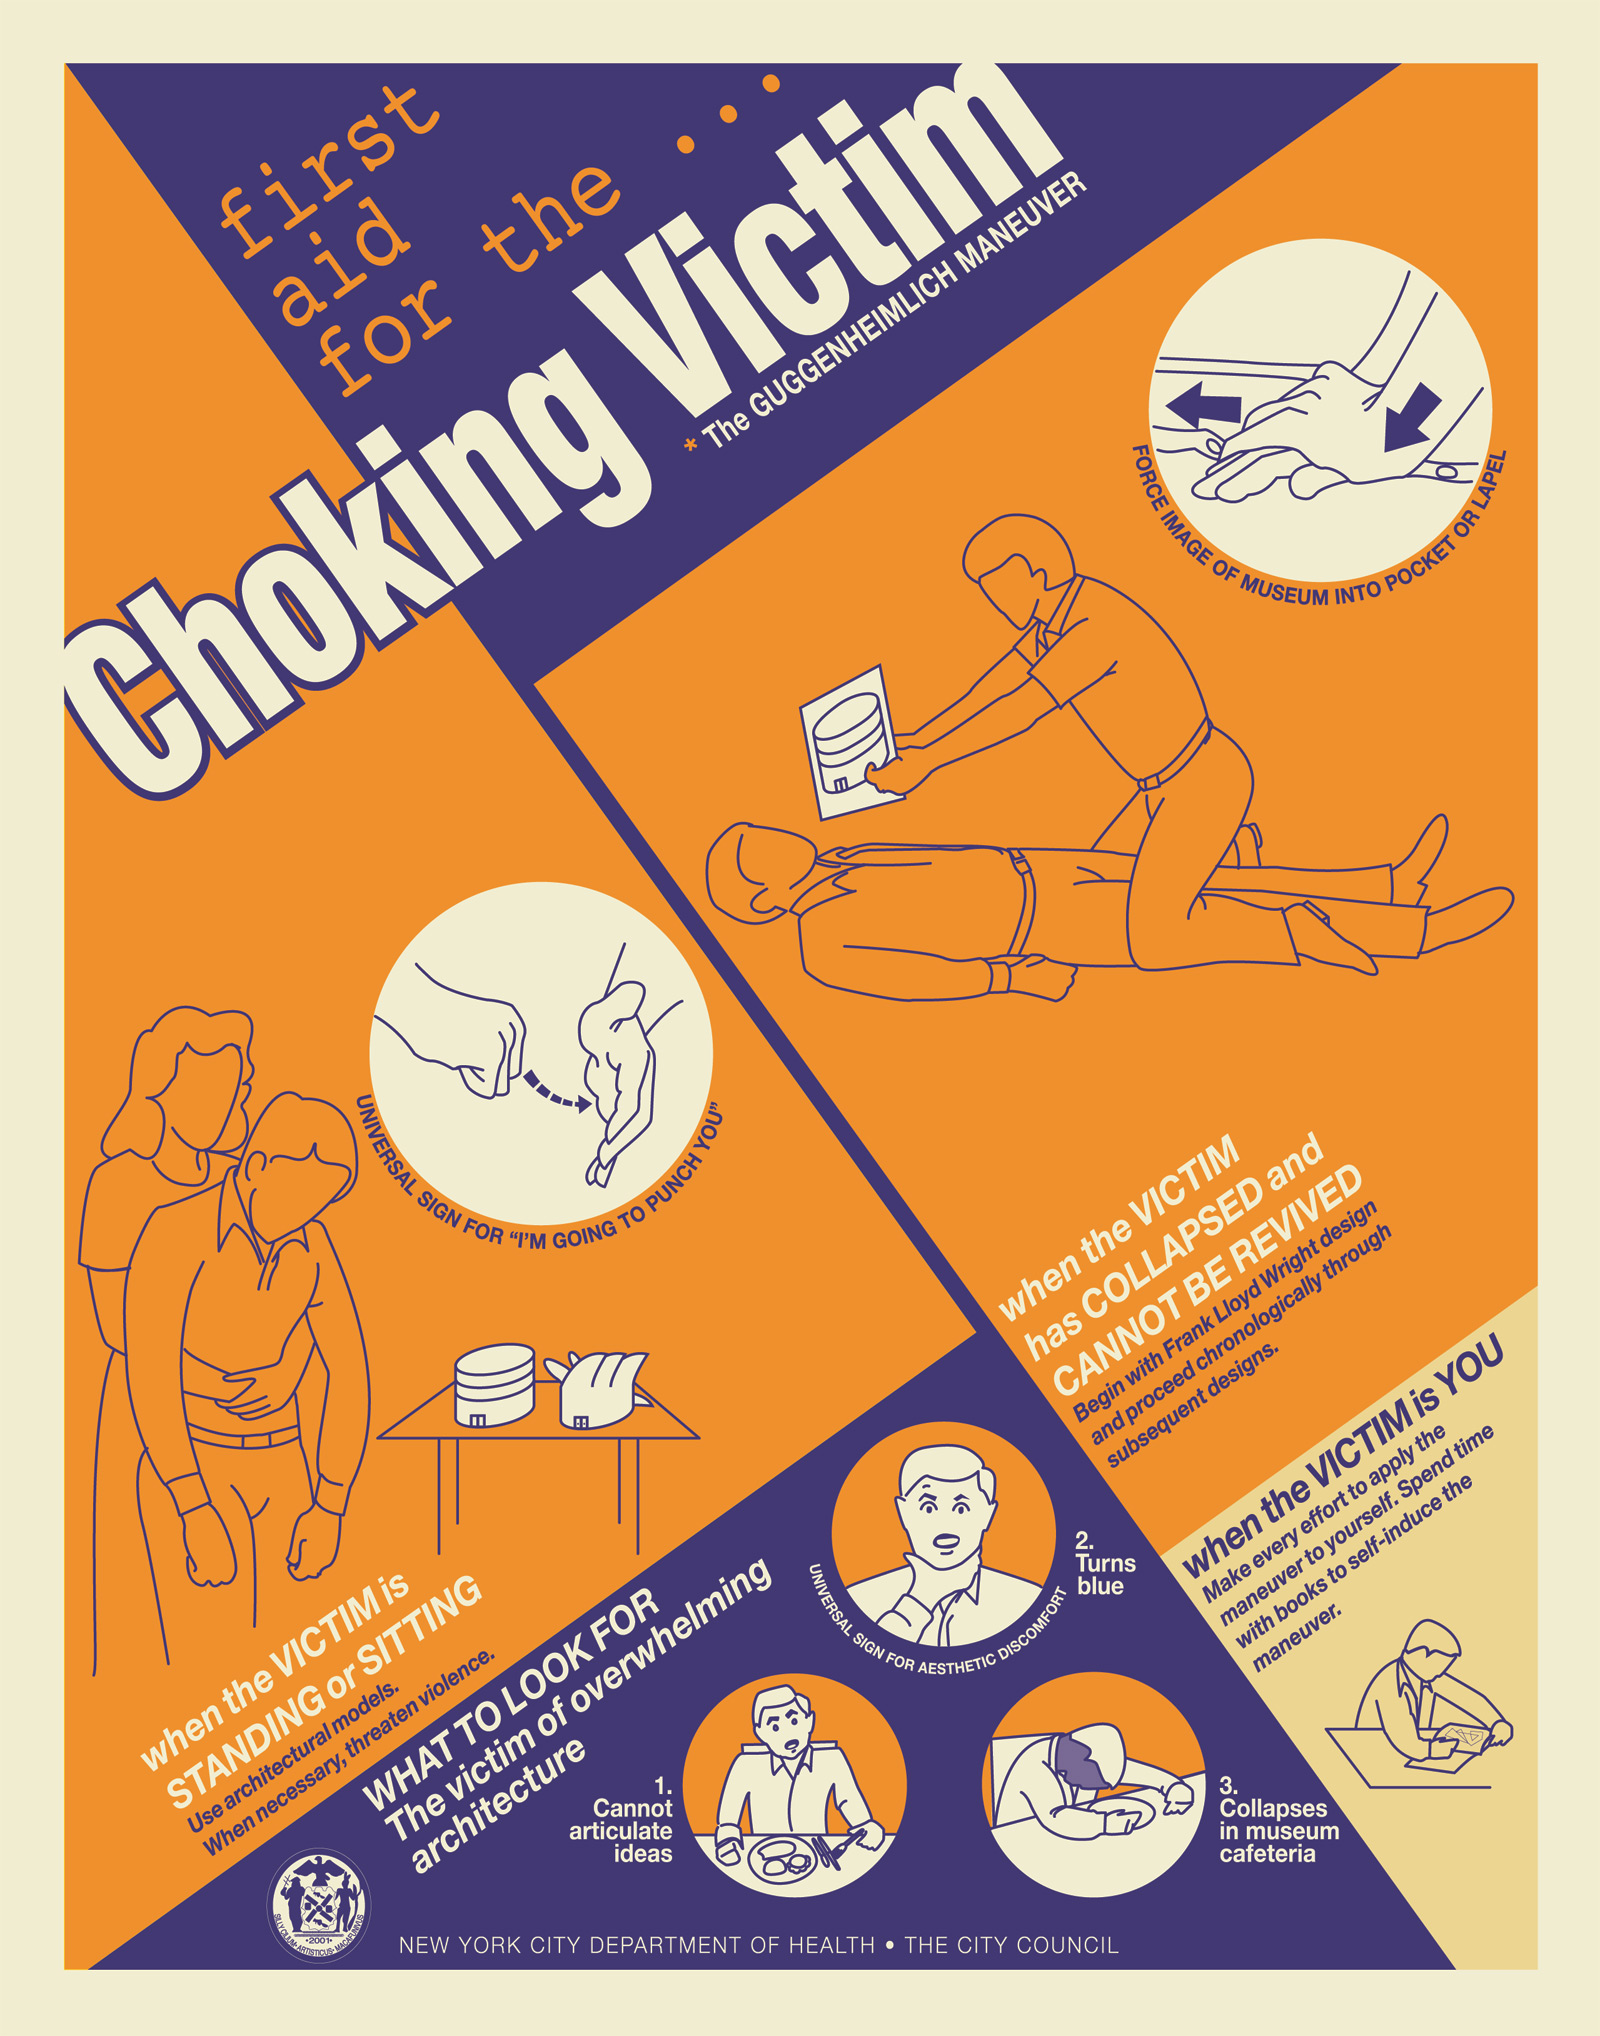 Instructional diagram for how to rescue choking victims by administering the Guggenheimlich Maneuver. The maneuver involves showing the victim photographs of the various Guggenheim museums in chronological order, which is guaranteed to induce vomiting and thereby save the victim.